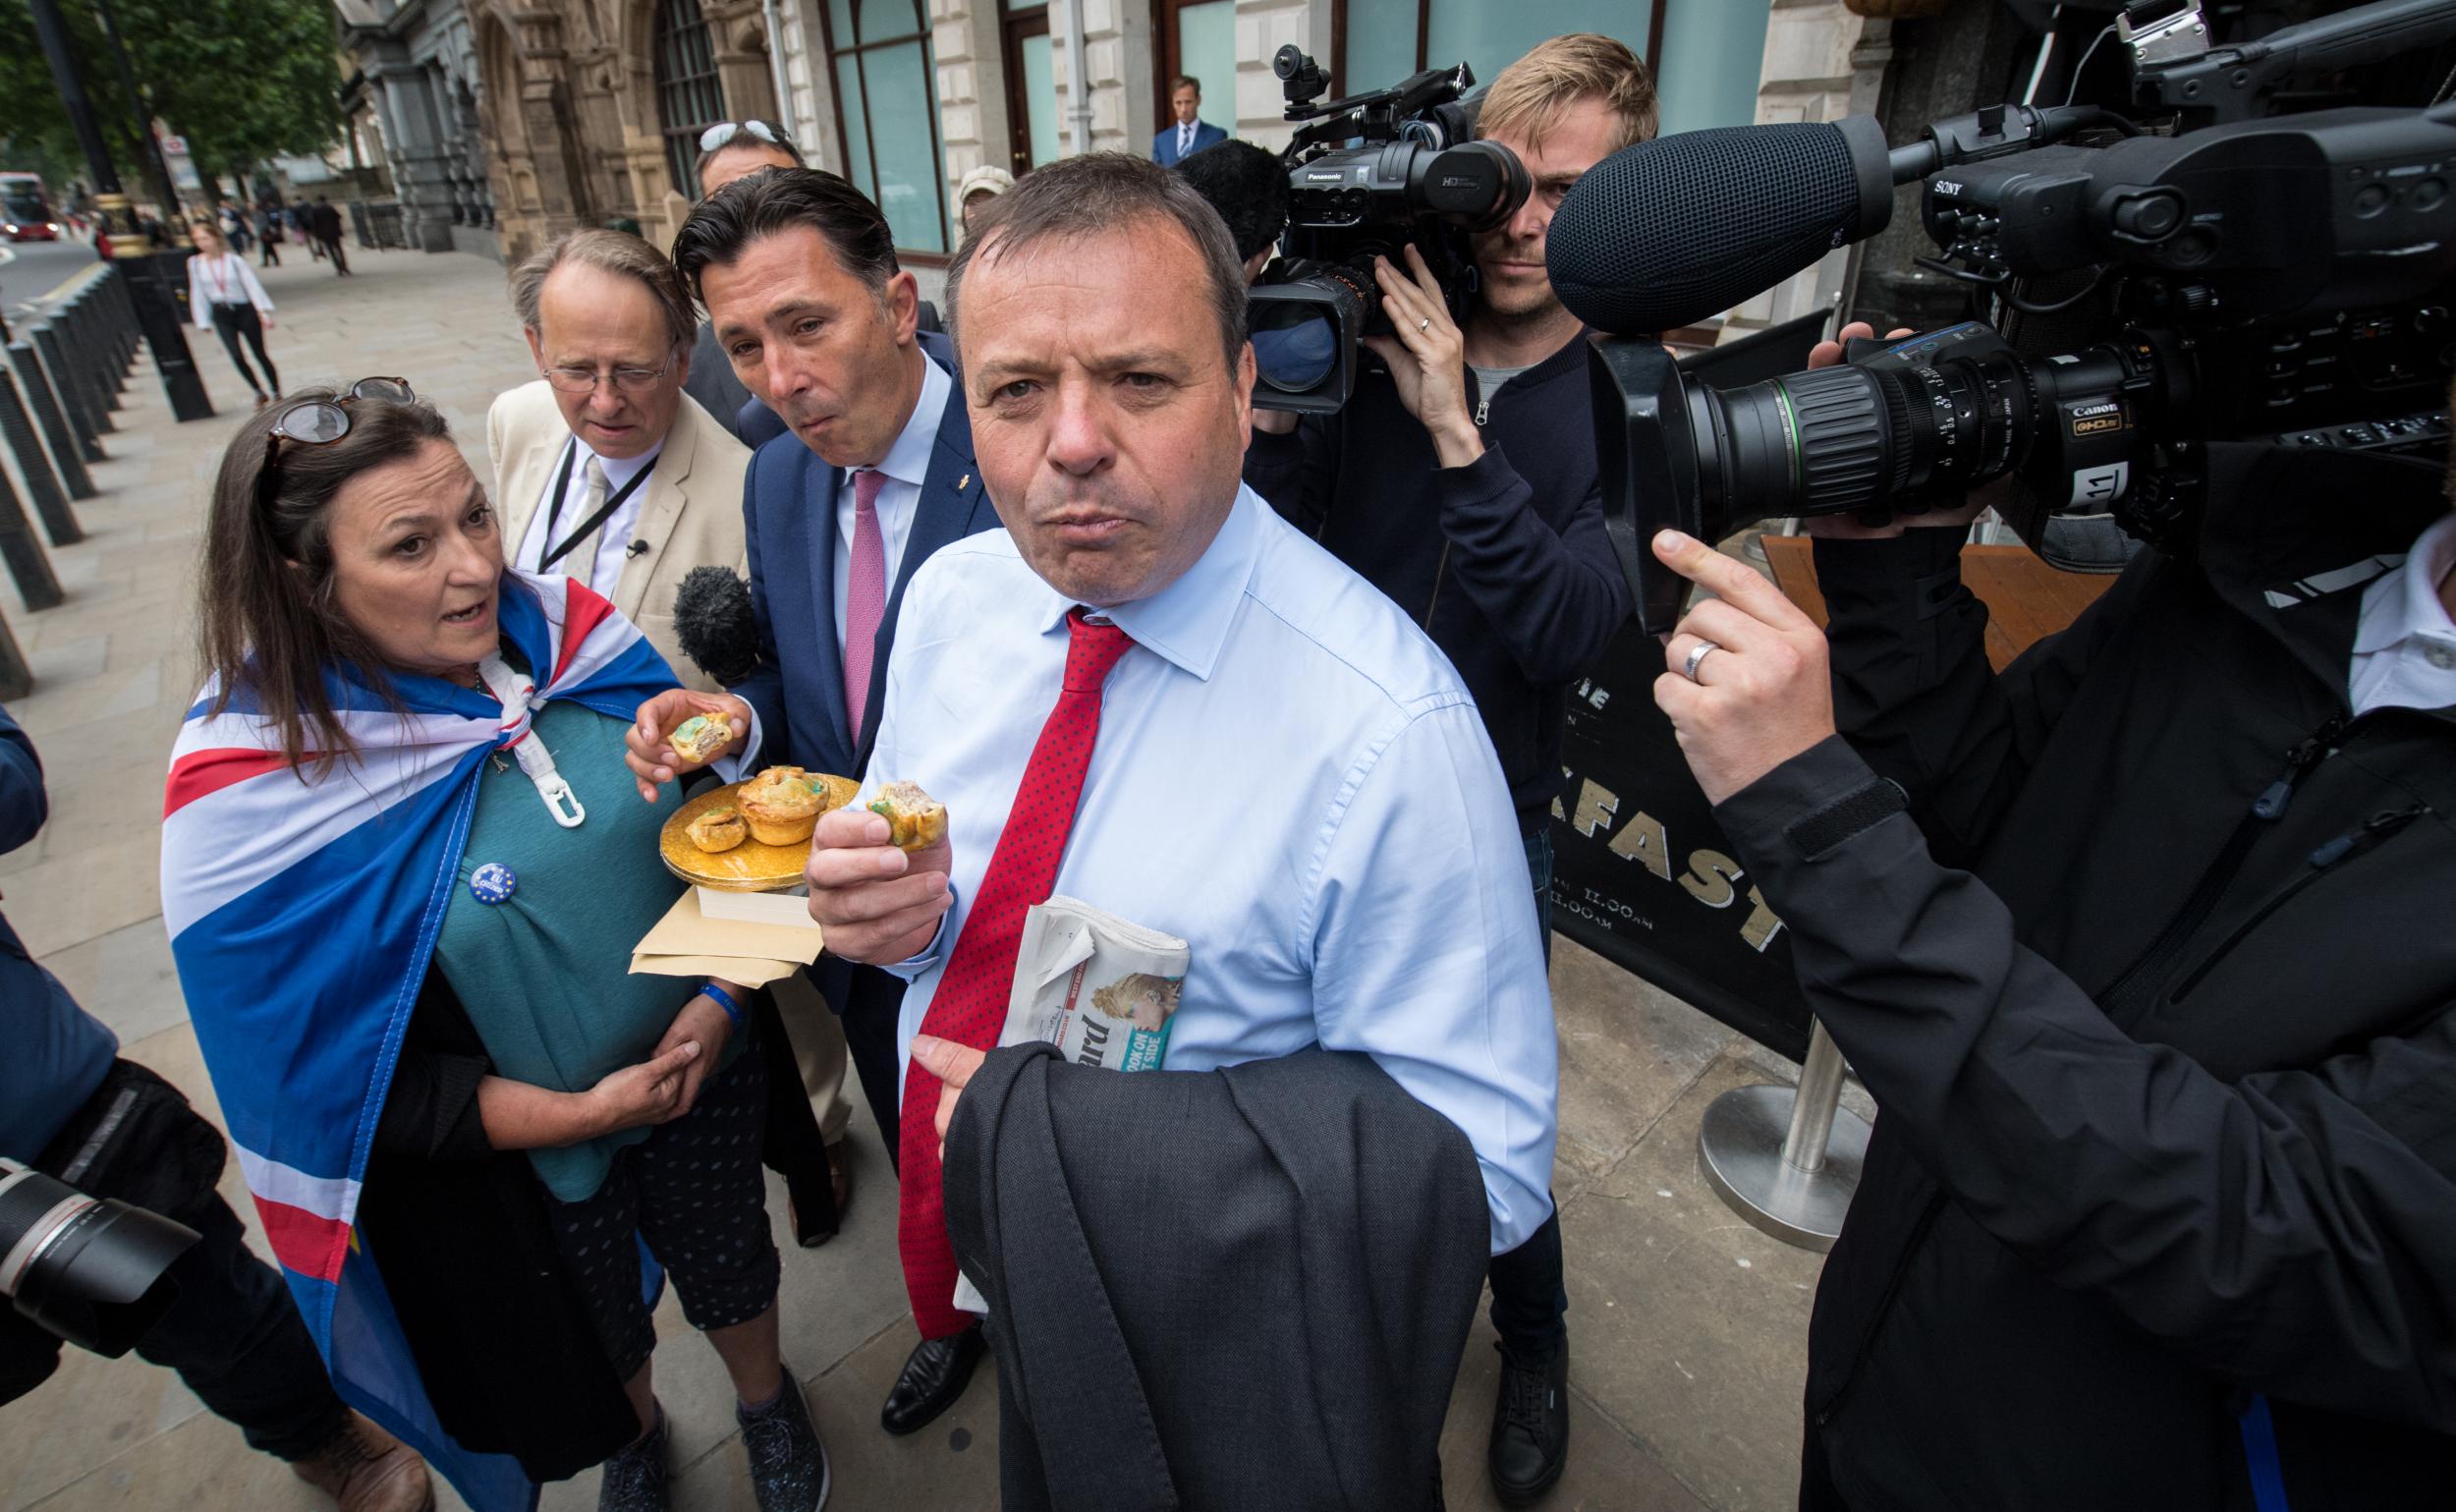 Leave.EU backer Arron Banks eats a pork pie after giving evidence to MPs in Westminster earlier this year